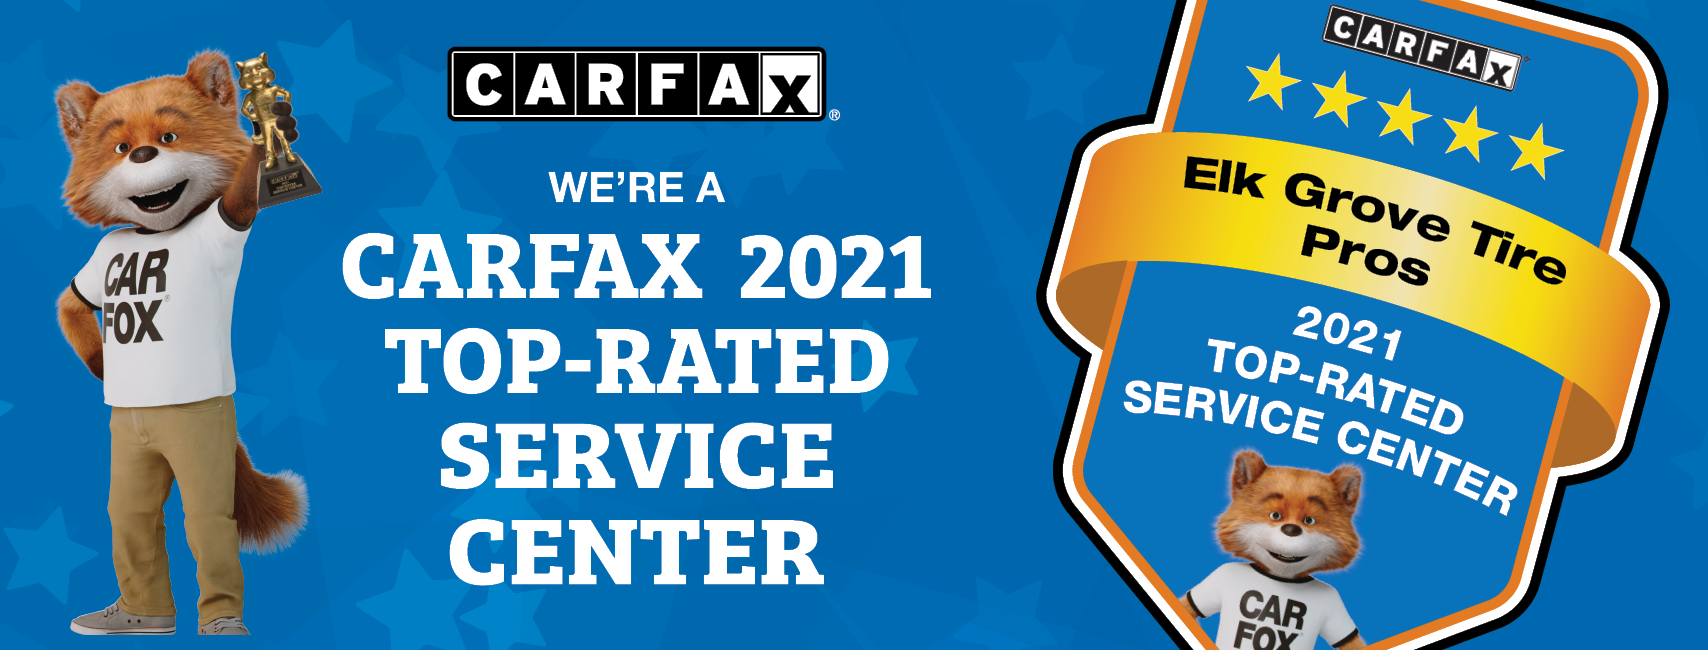 2021 CARFAX Top Rated Service